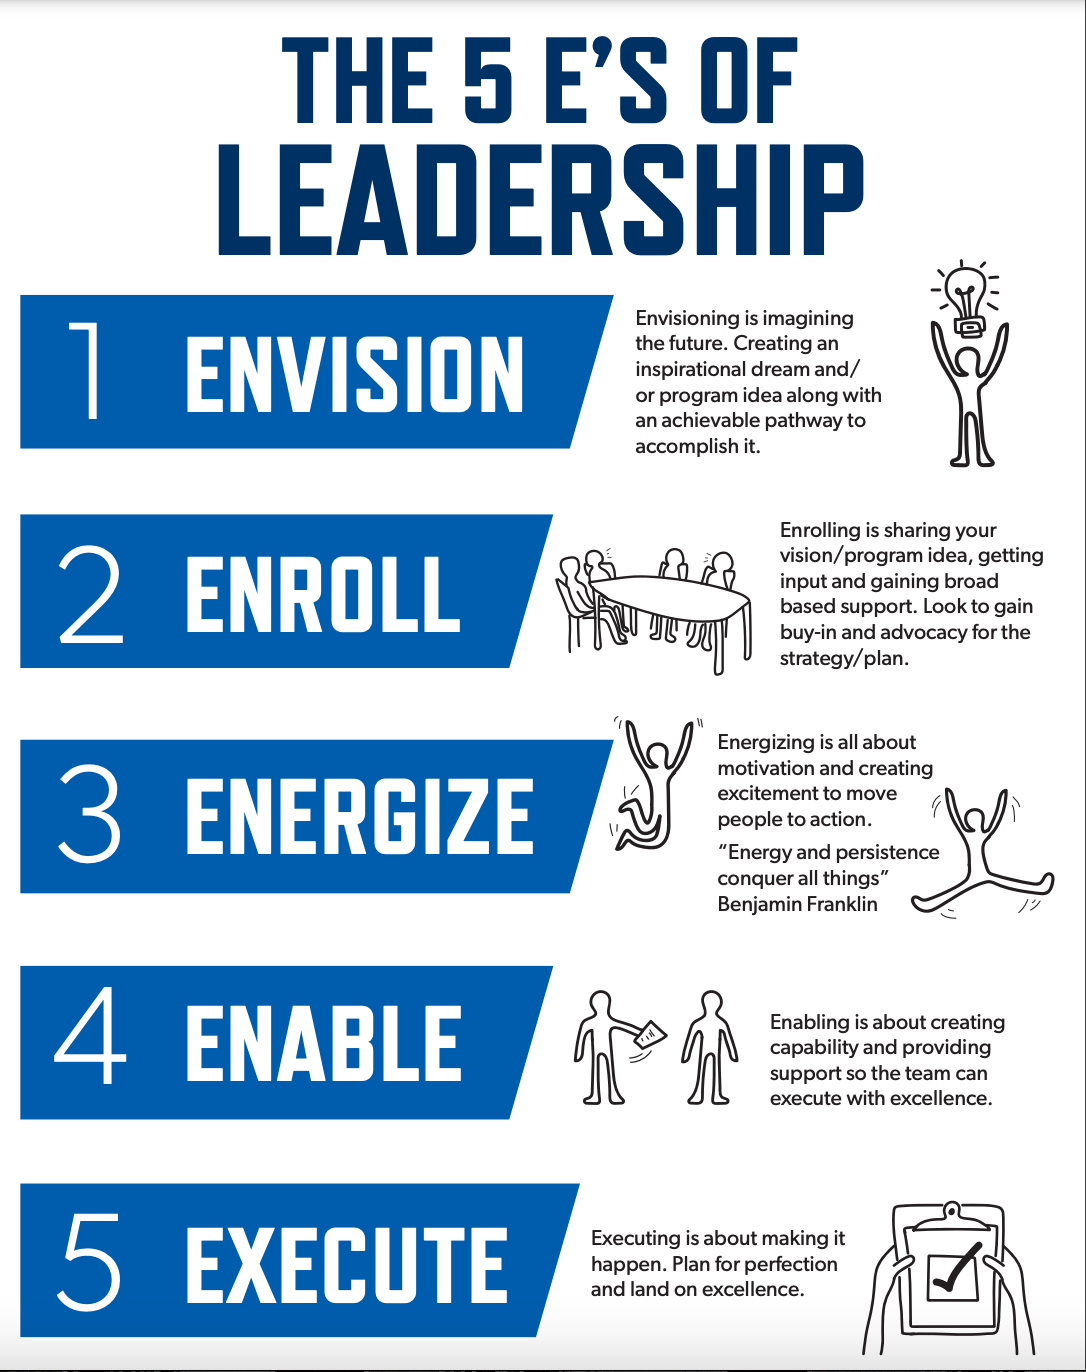 Graphic showing the 5 E's of Leadership, which are Envision, Enroll, Energize, Enable, and Execute.